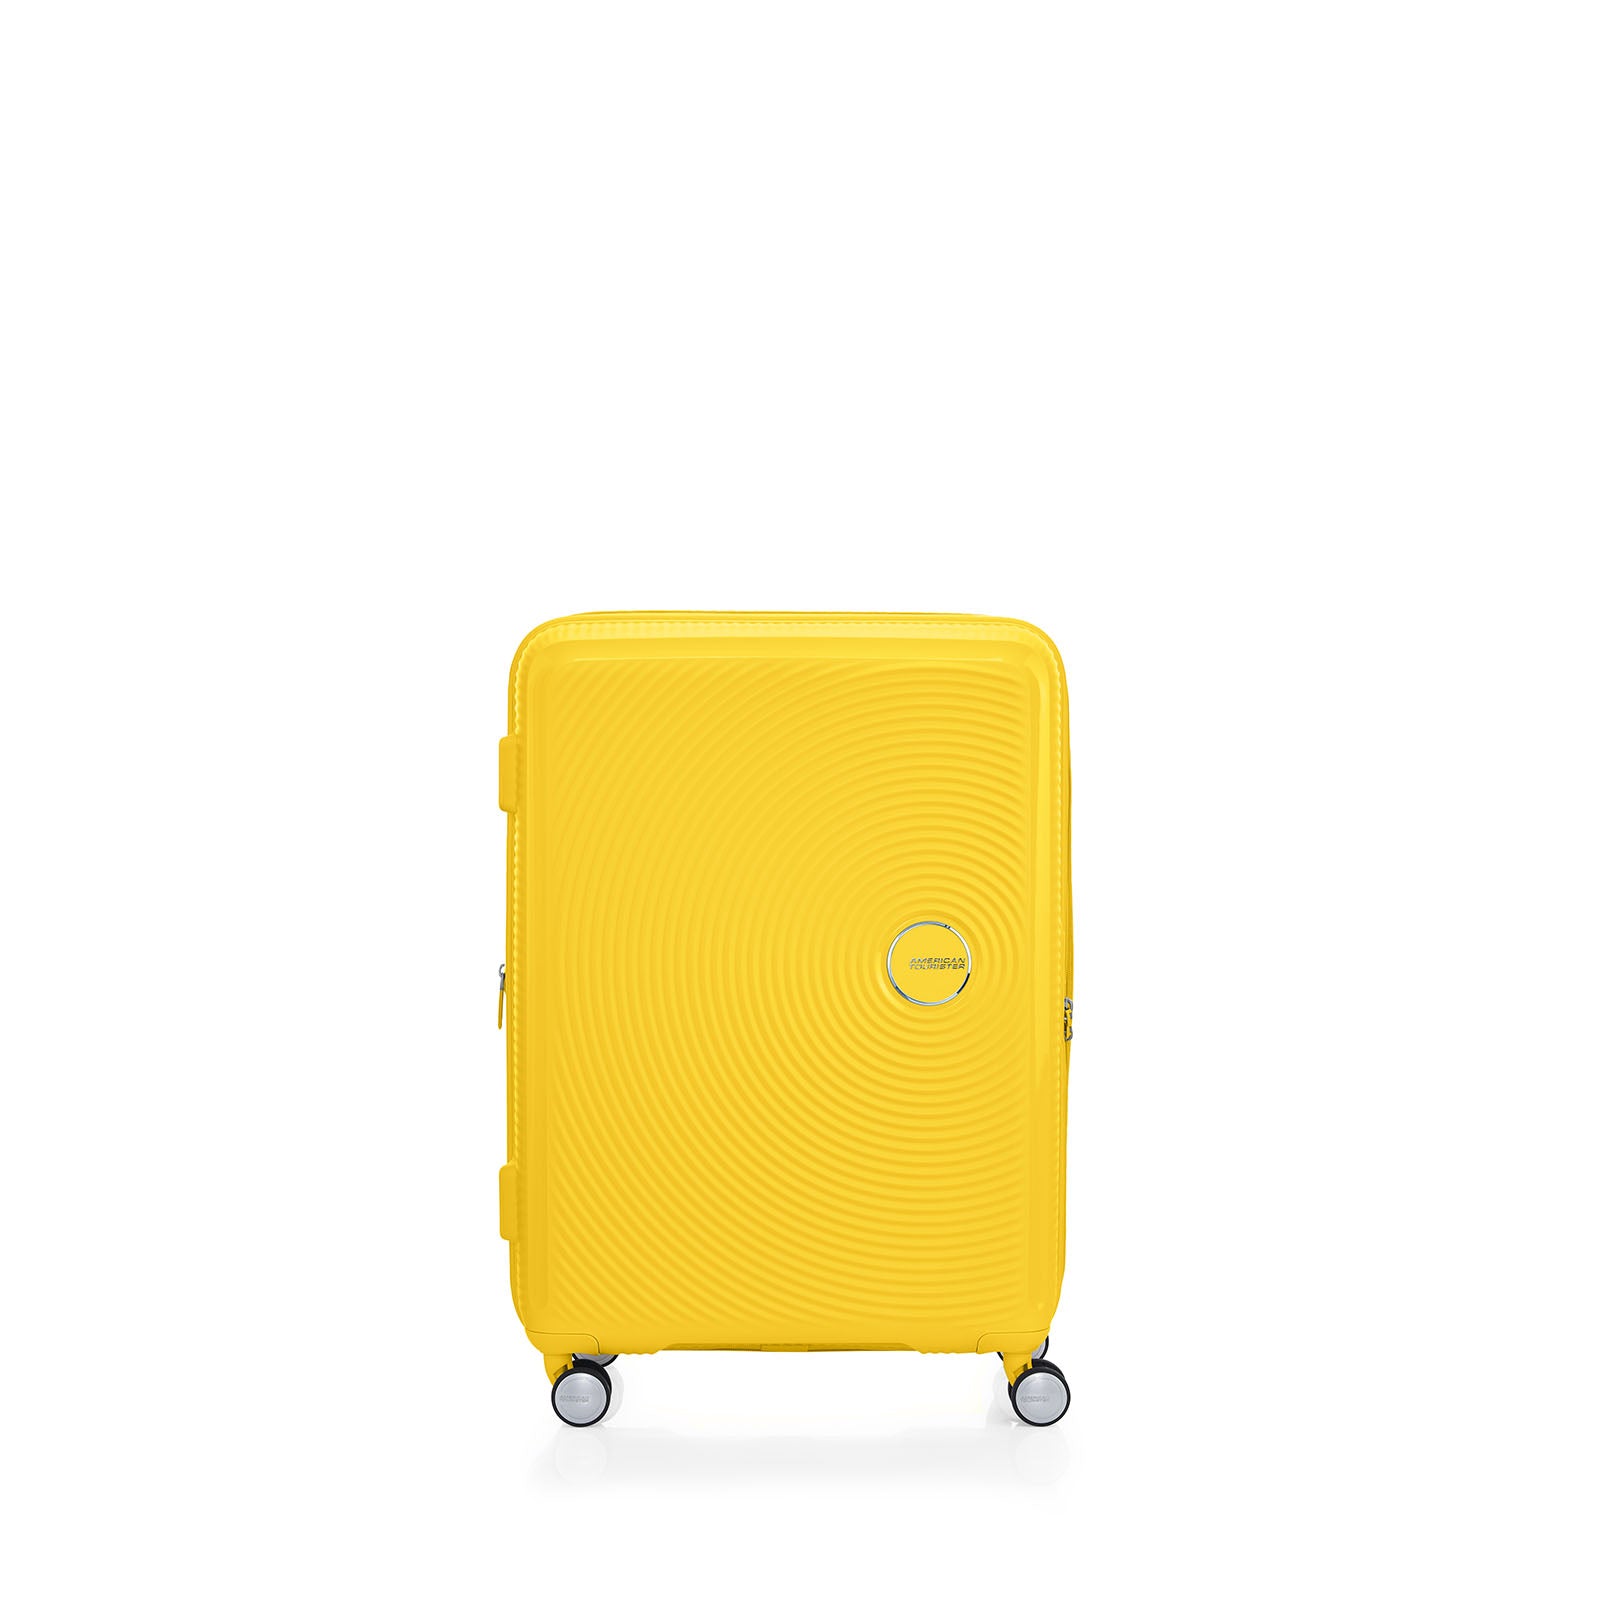 American-Tourister-Curio-2-69cm-Suitcase-Golden-Yellow-Front